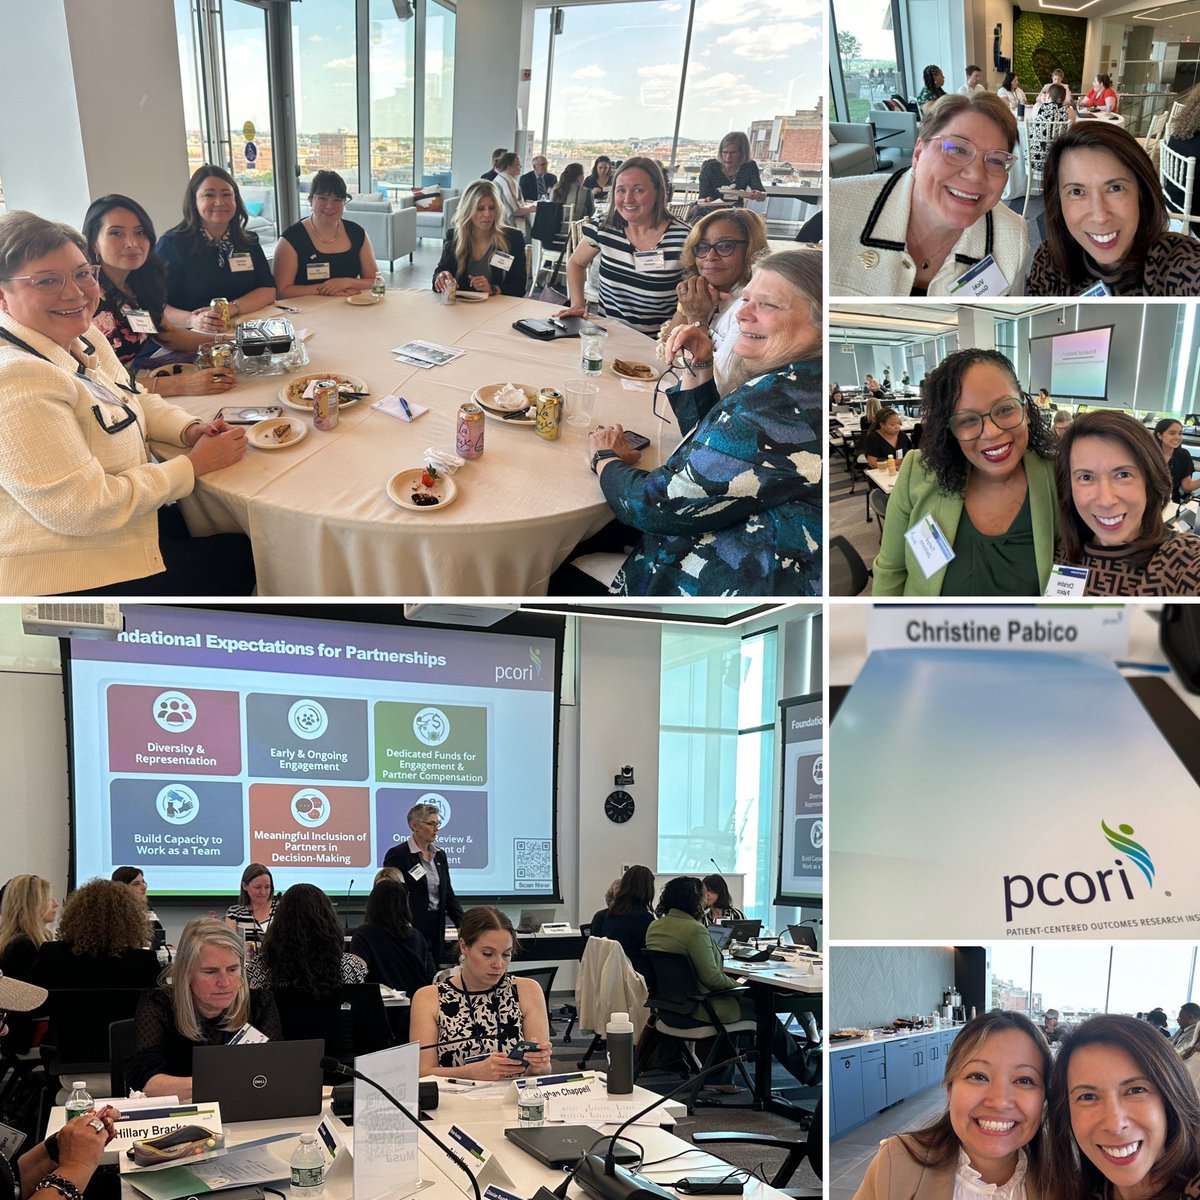 Stimulating day at the Patient-Centered Outcomes Research Institute Clinician Roundtable. Loved the meaningful dialogue with other healthcare stakeholders to shape the research agenda for PCORI to advance patient-centered outcomes & address clinician workforce burnout.